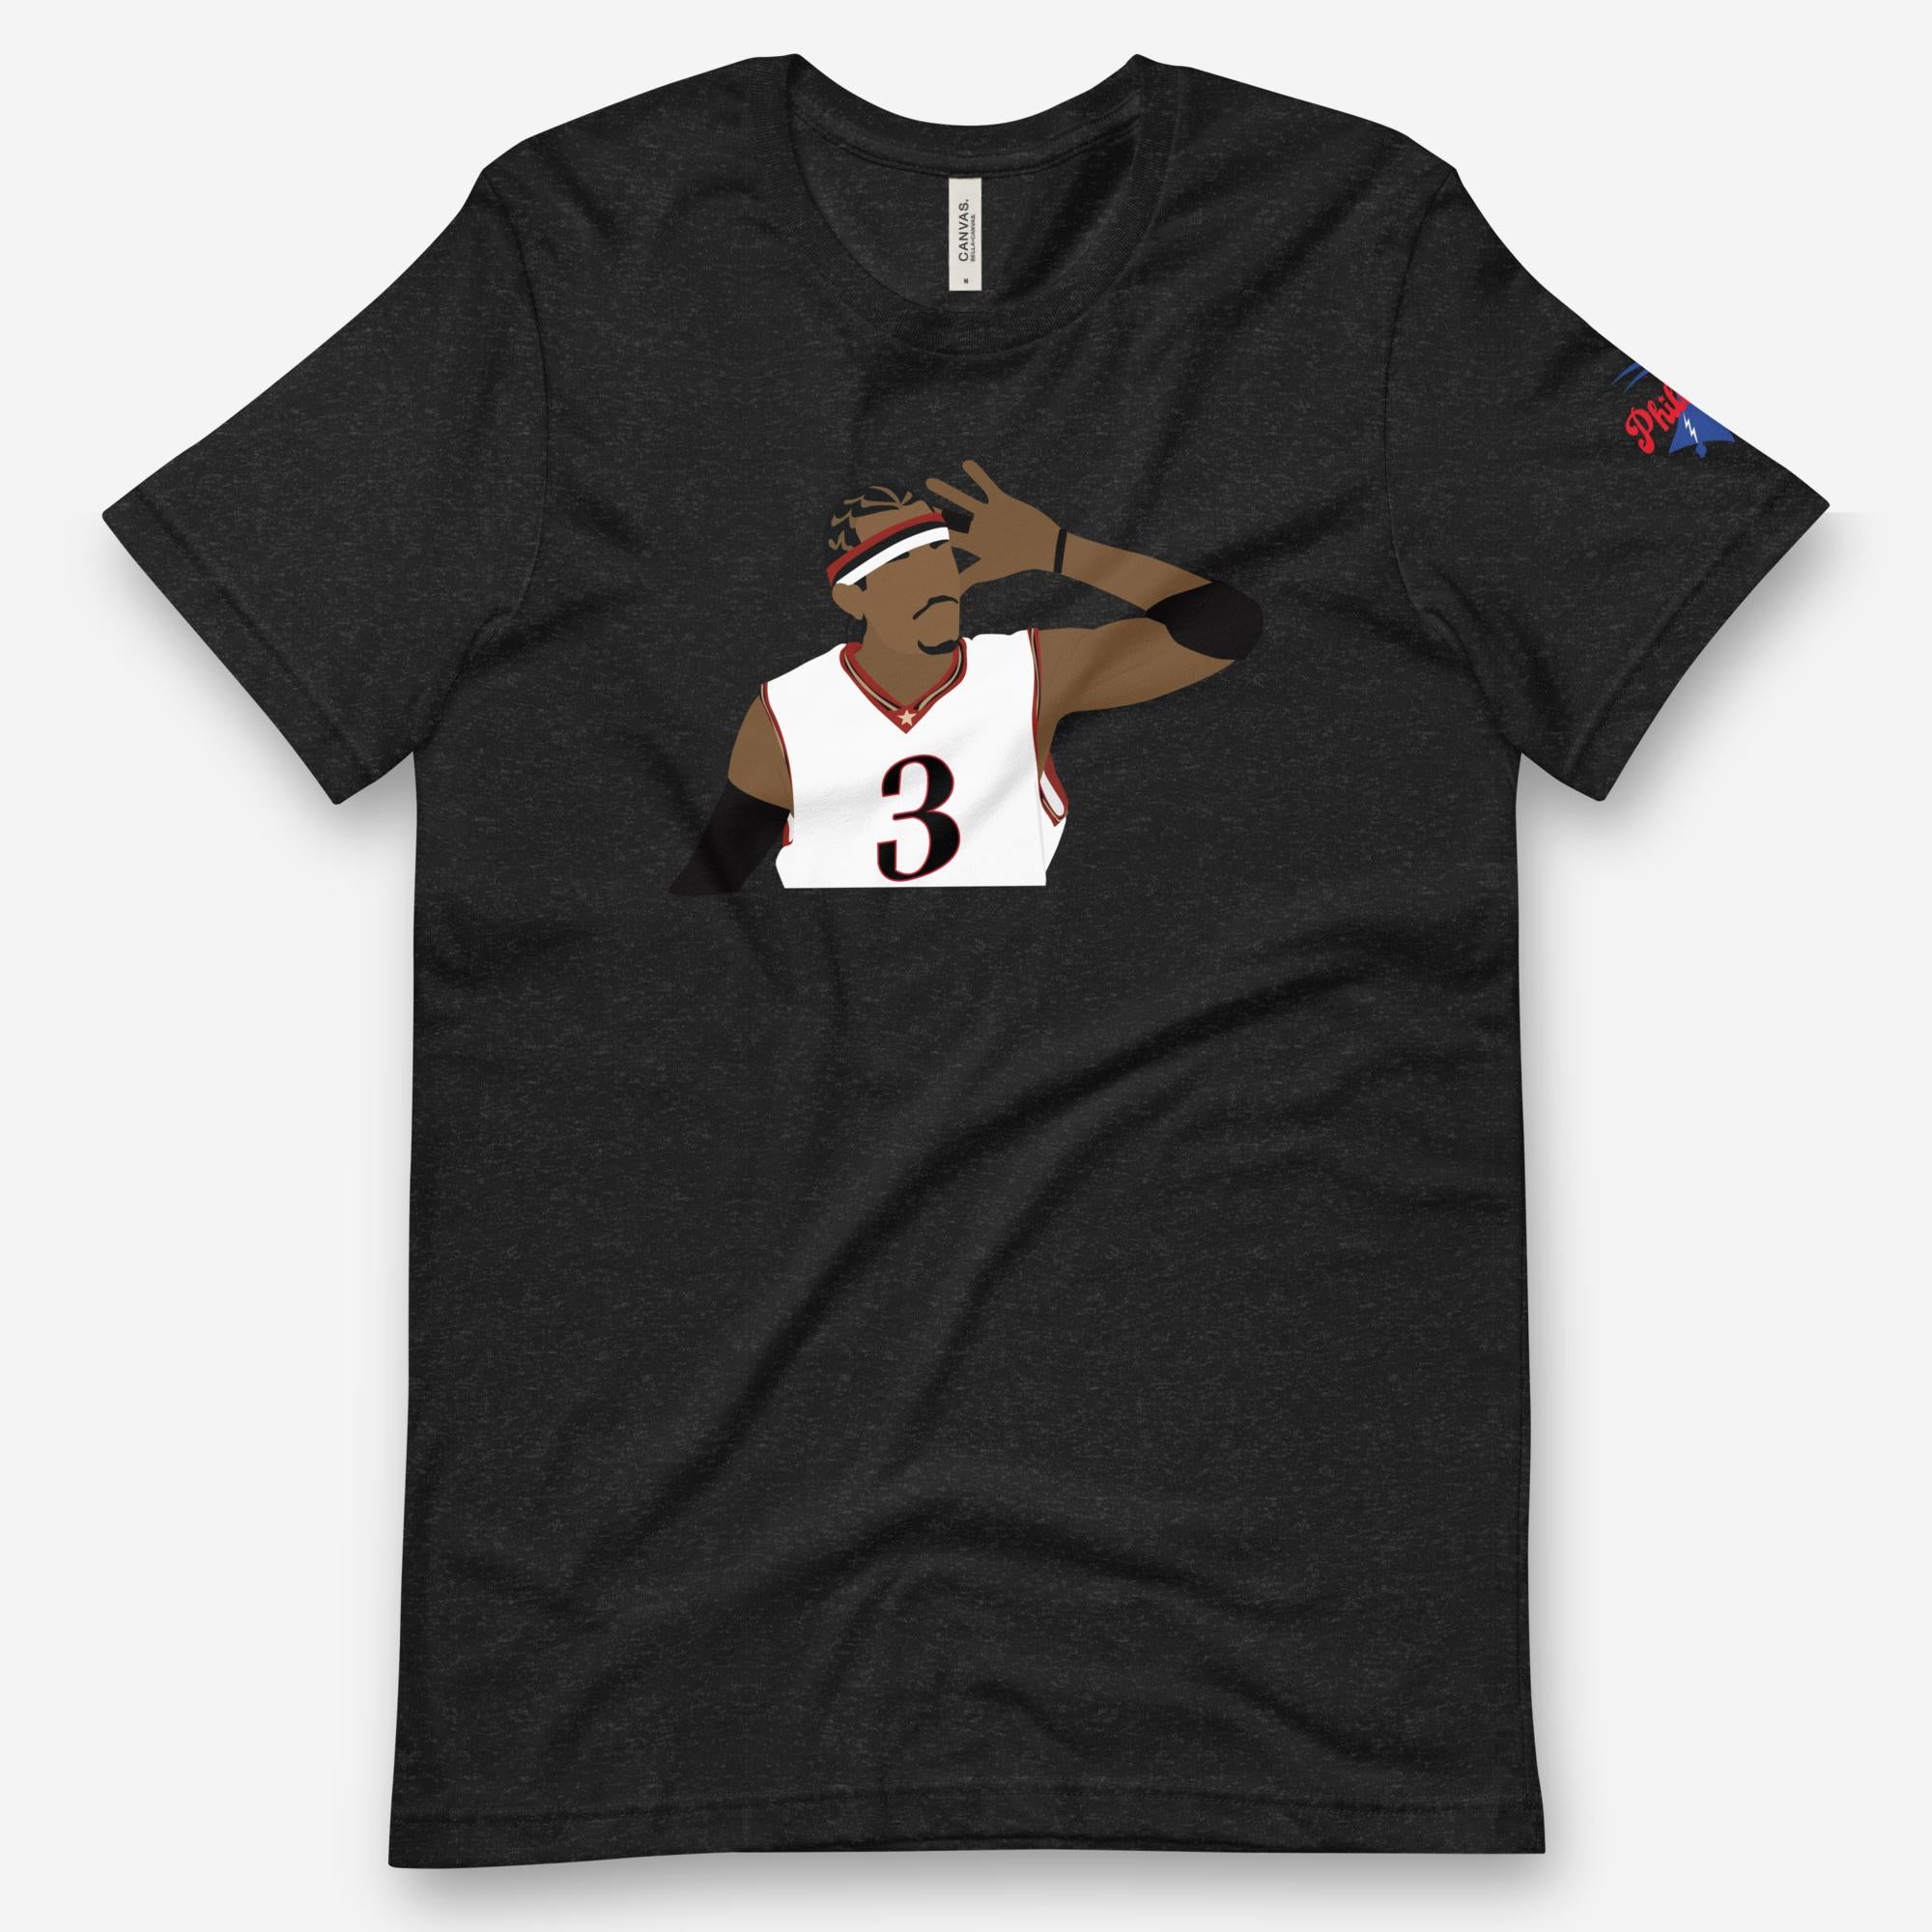 "The Answer" Tee